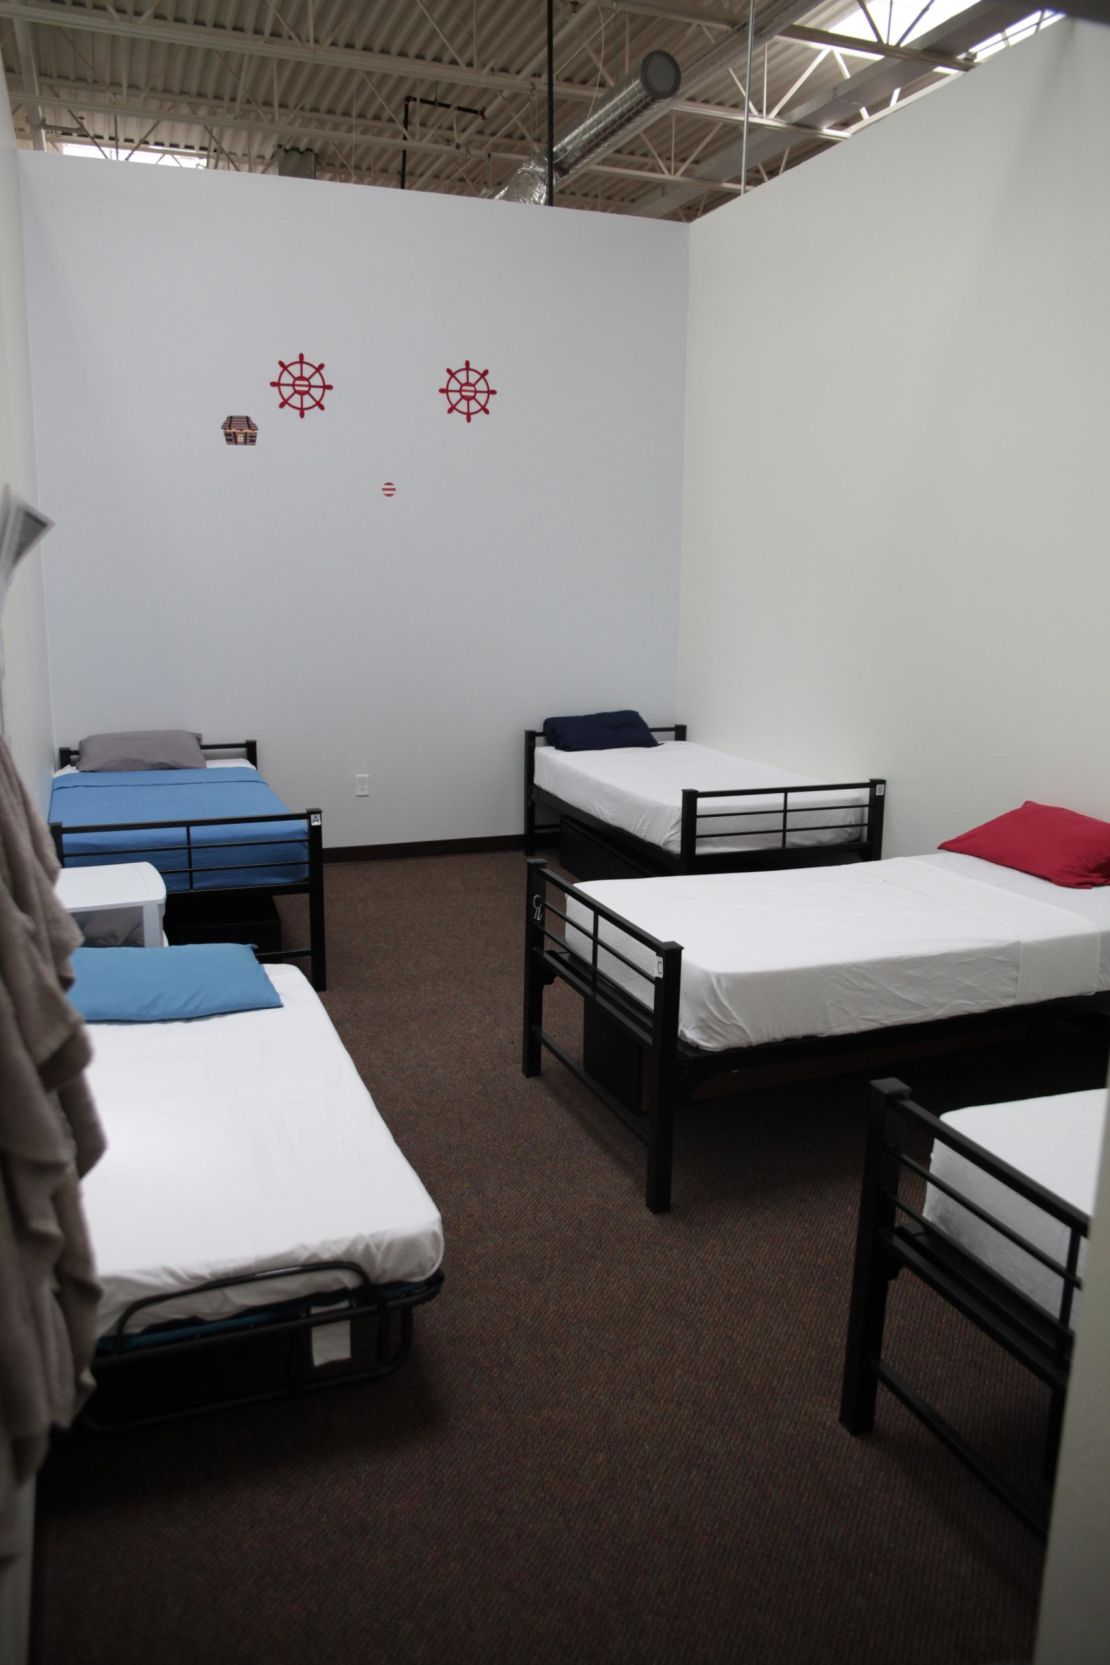 Five cot-like beds have been squeezed into bedrooms built originally for four at the shelter.